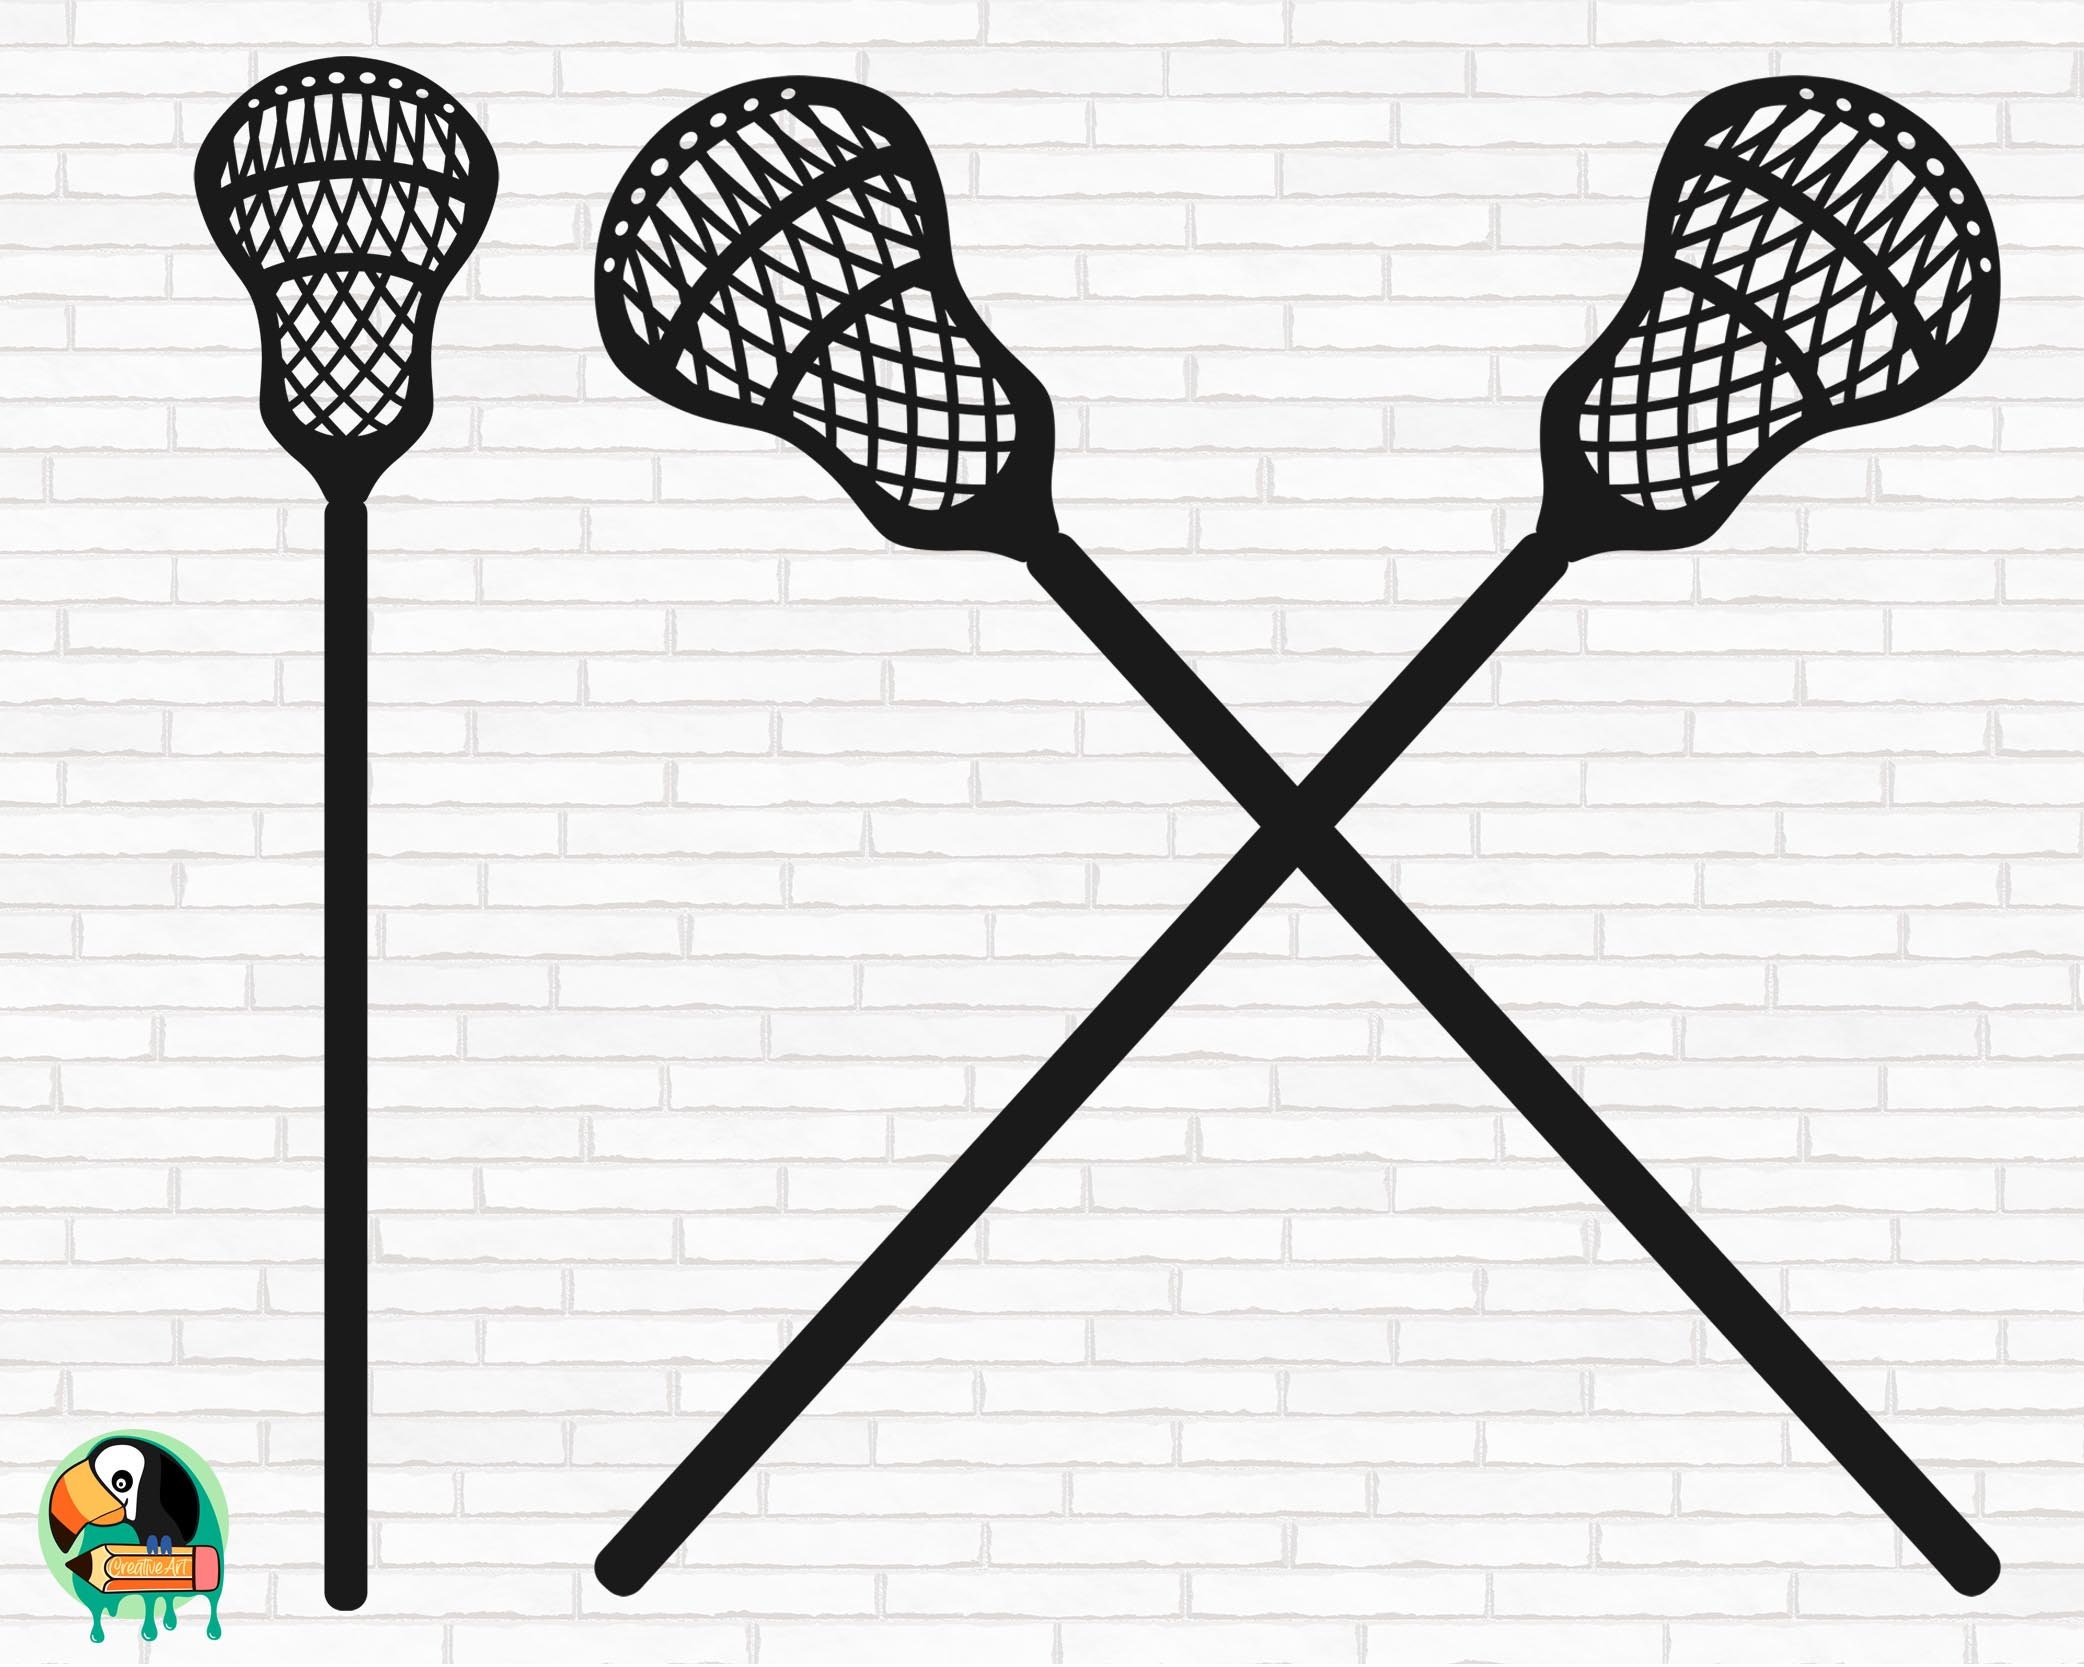 Exy \ Lacrosse sticks (black netting) Art Print for Sale by